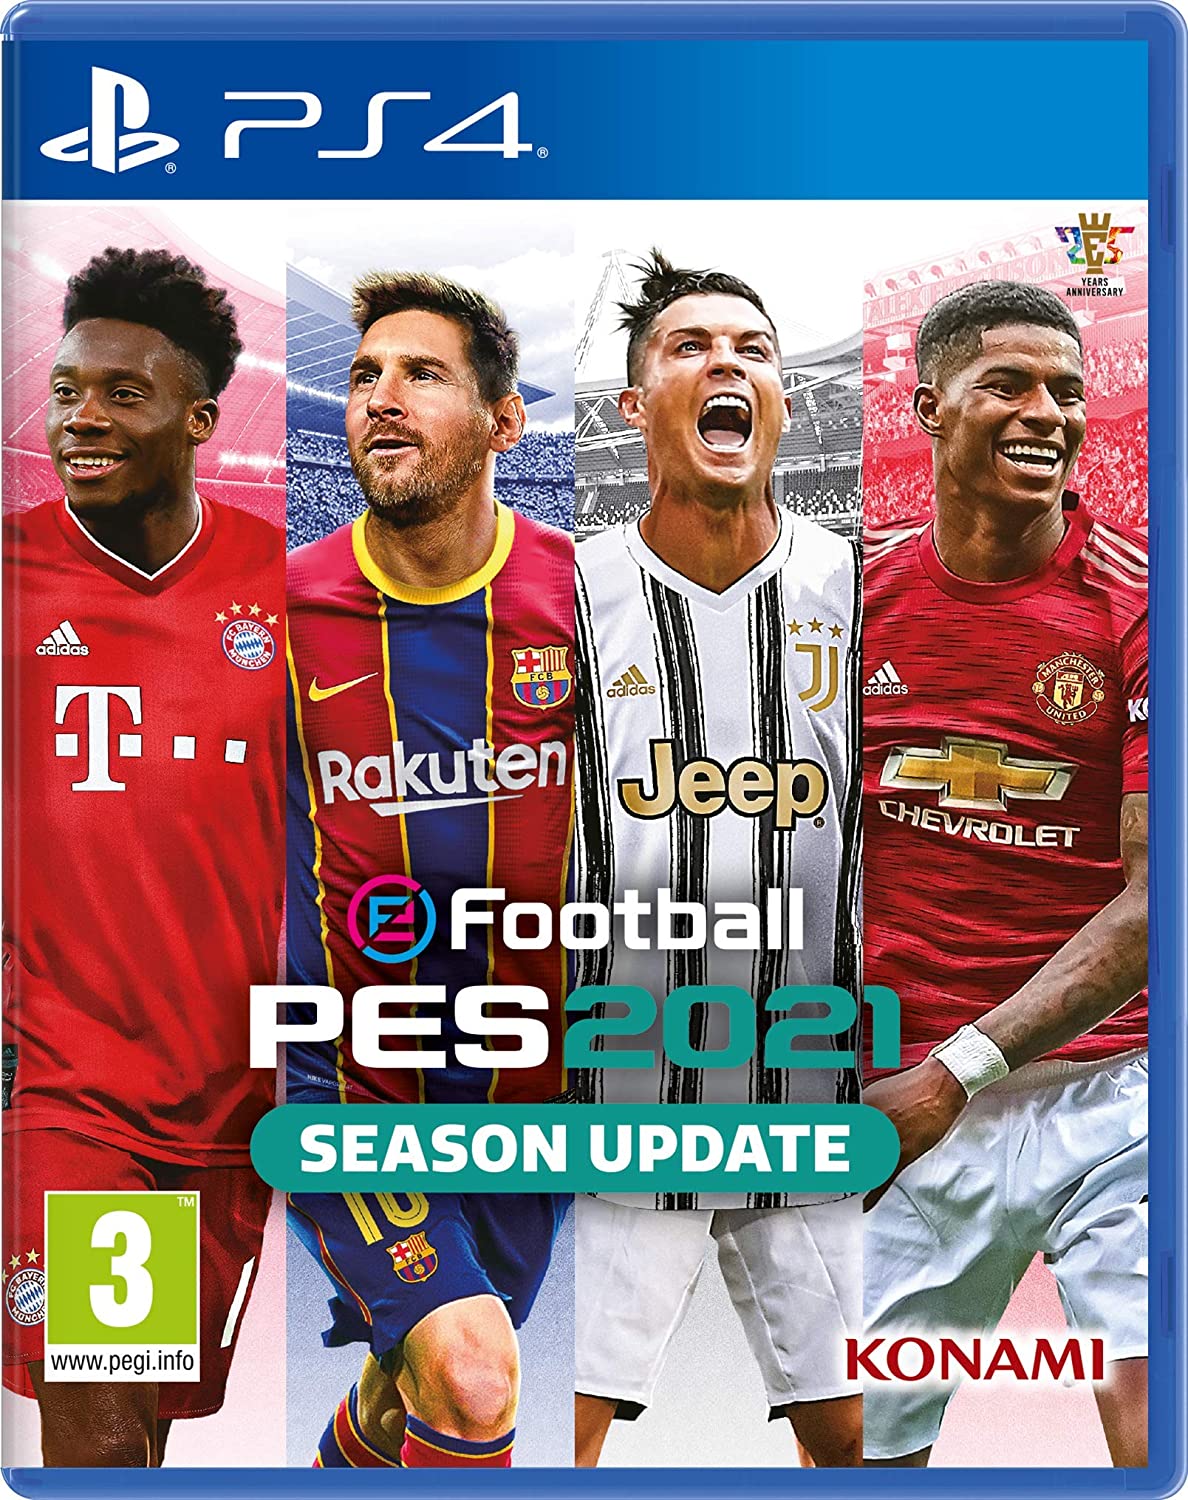 efootball pes 2021 download ppsspp